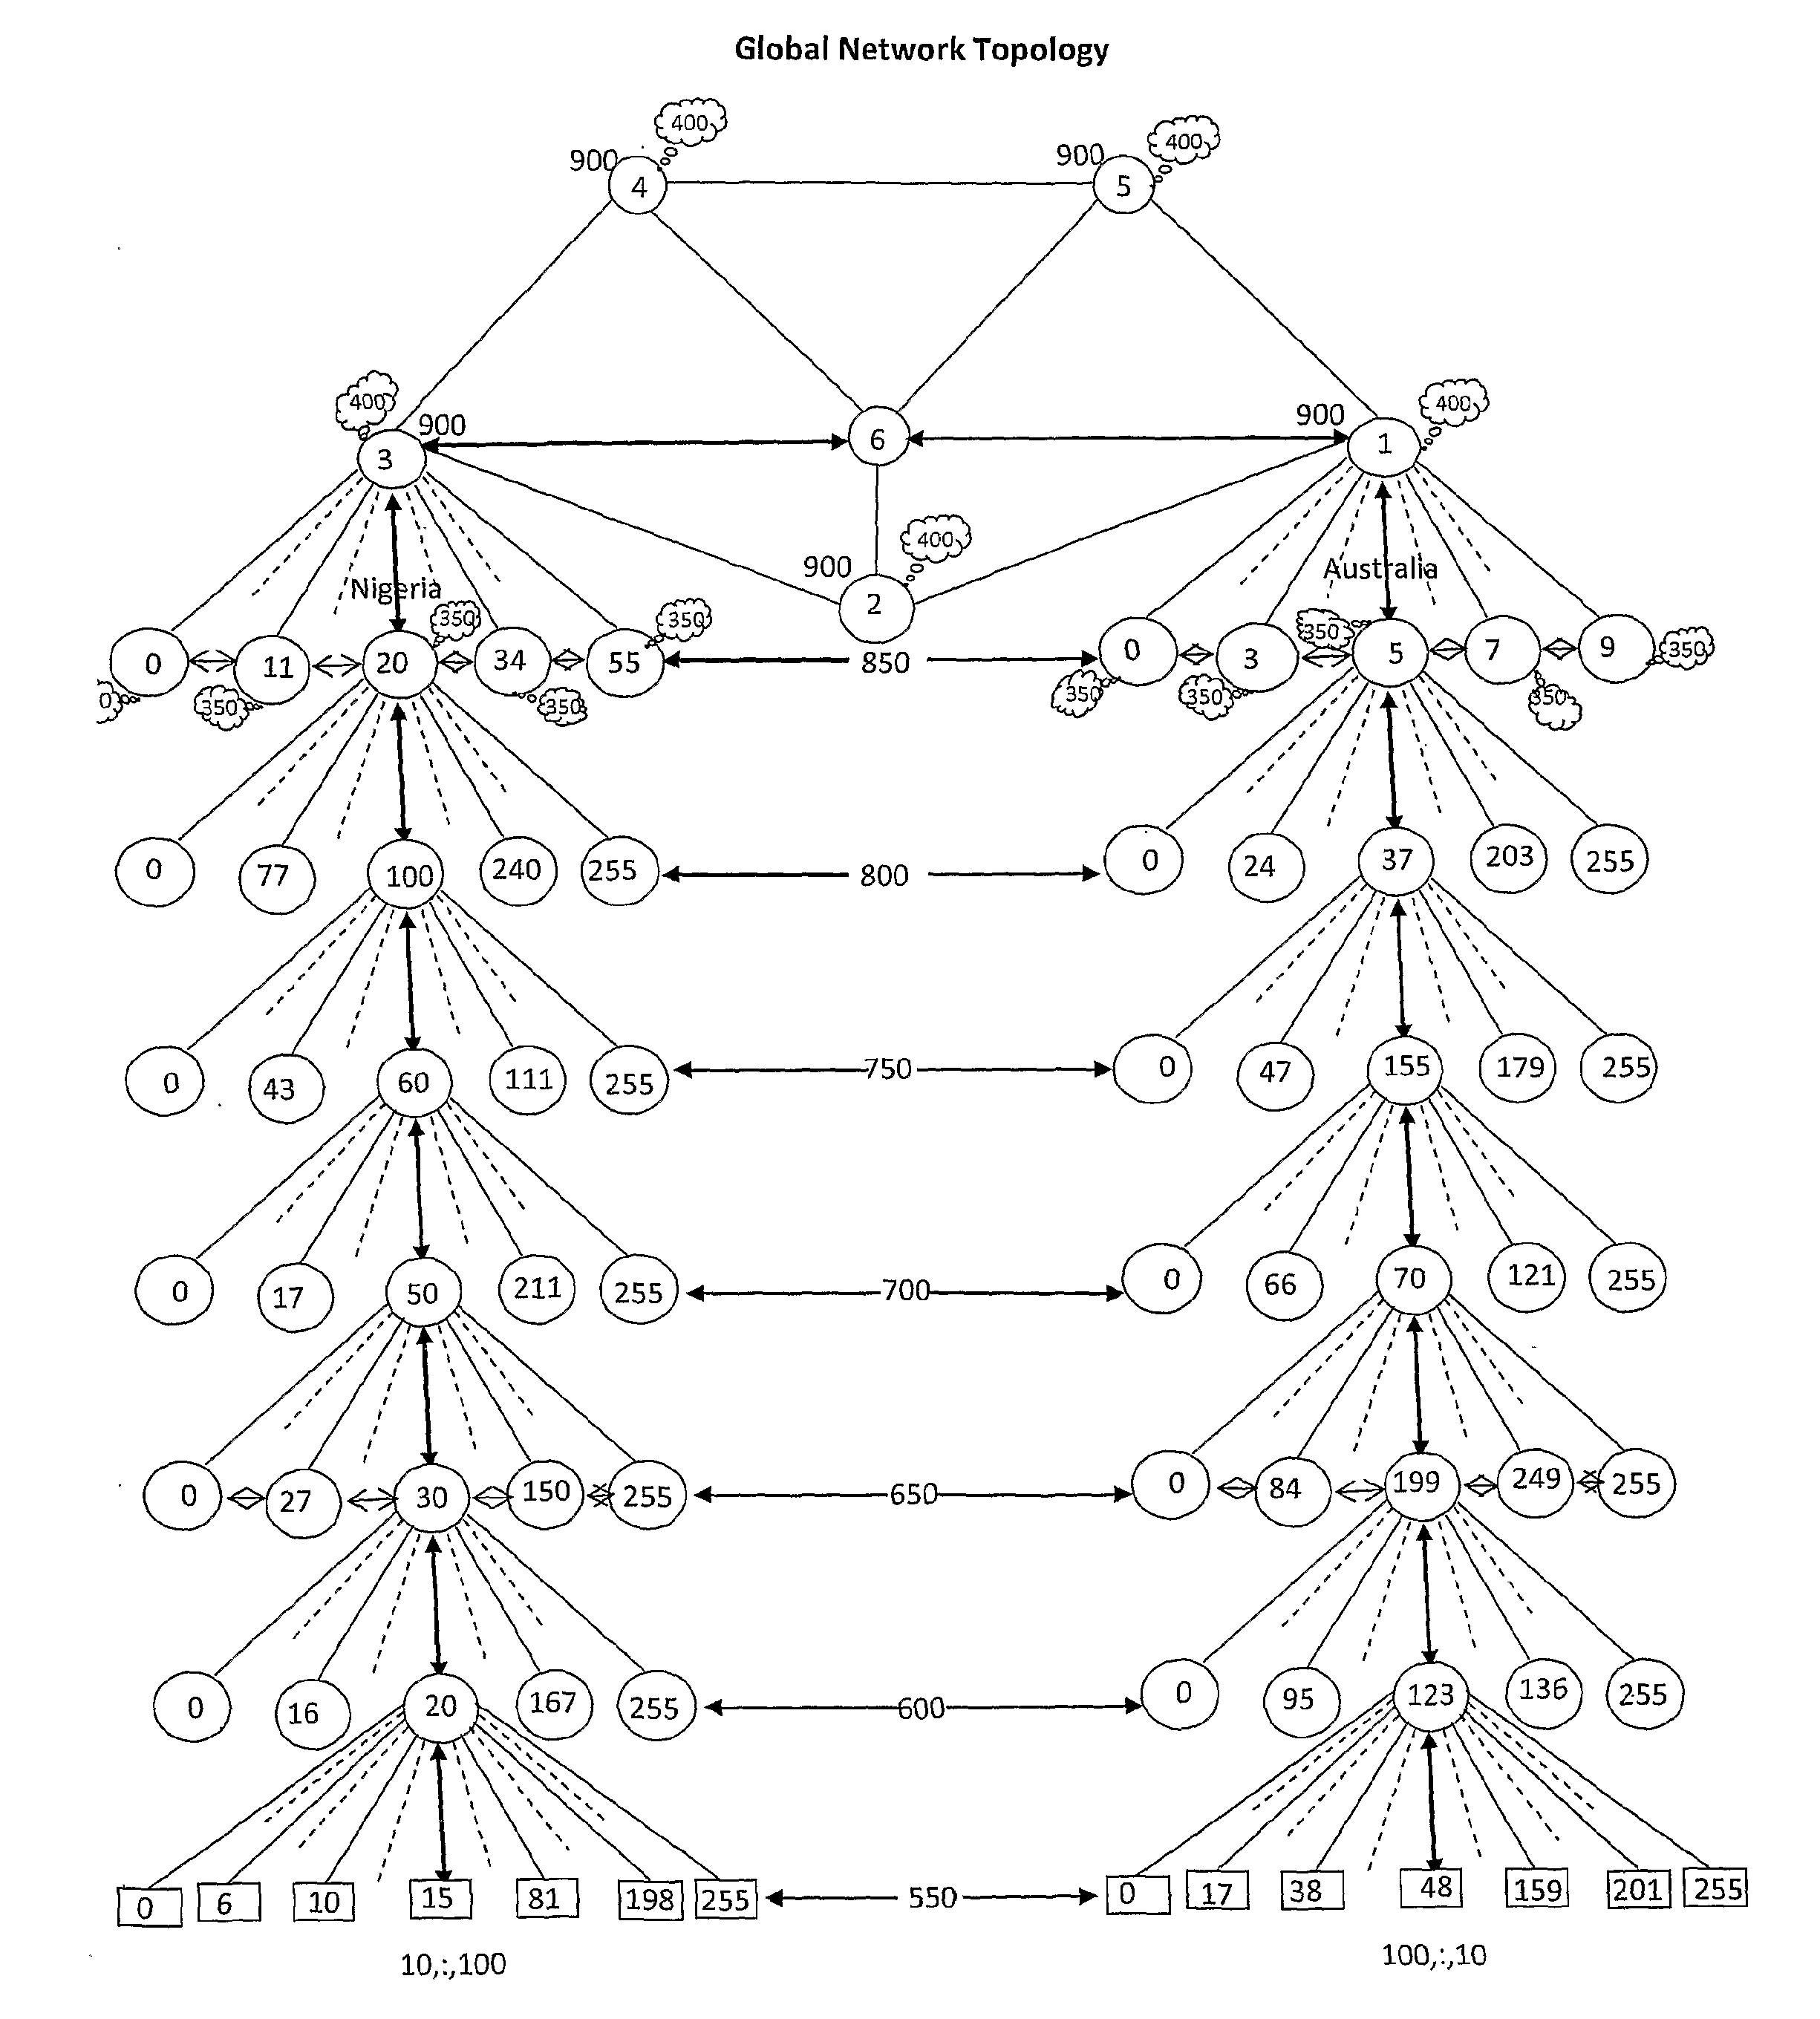 Alternate structure with improved technologies for computer communication and data transfers